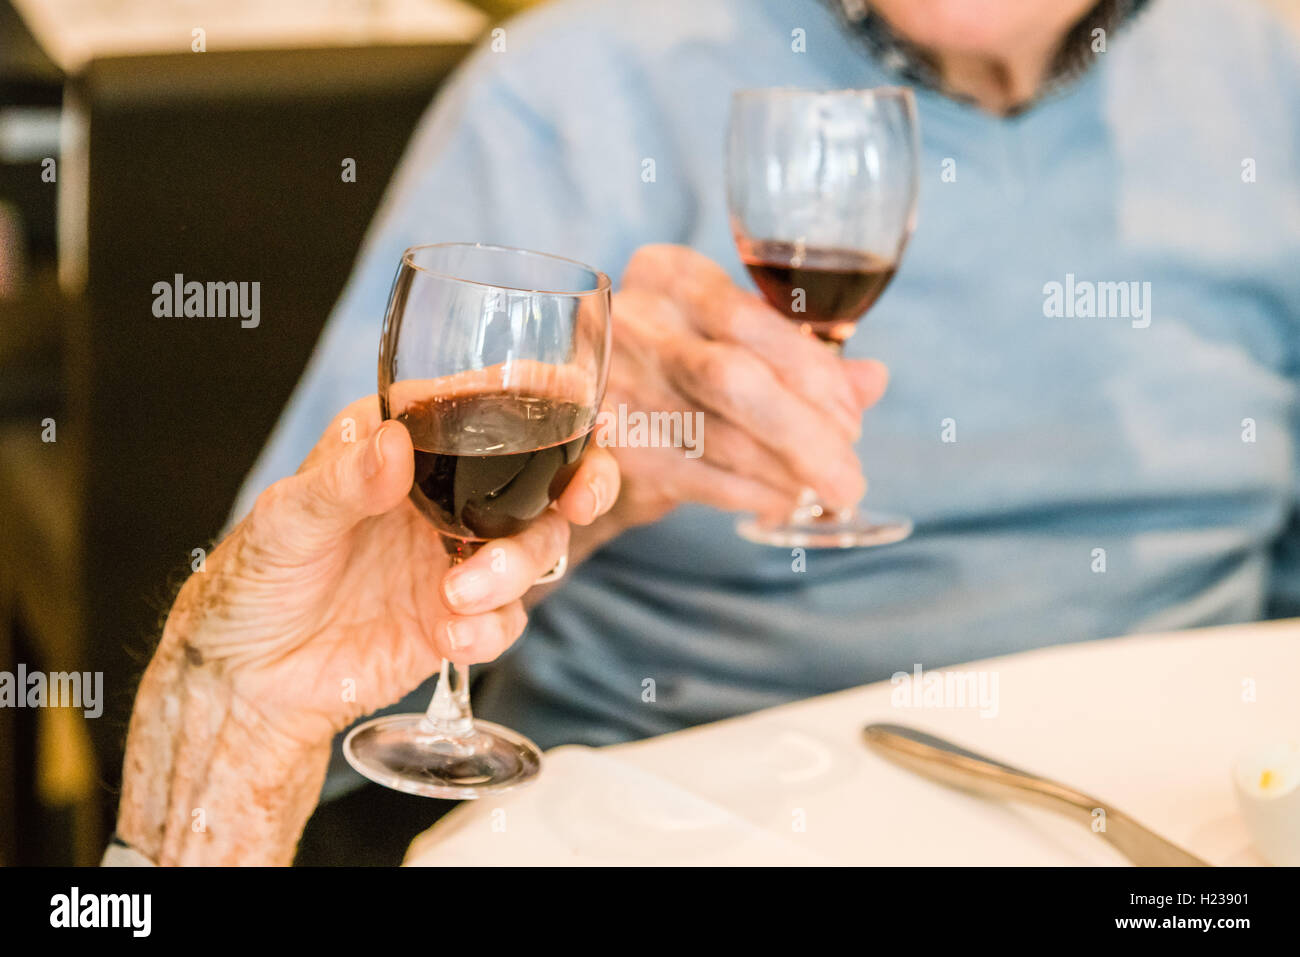 Elderly couple drinking a glass of red wine. Stock Photo